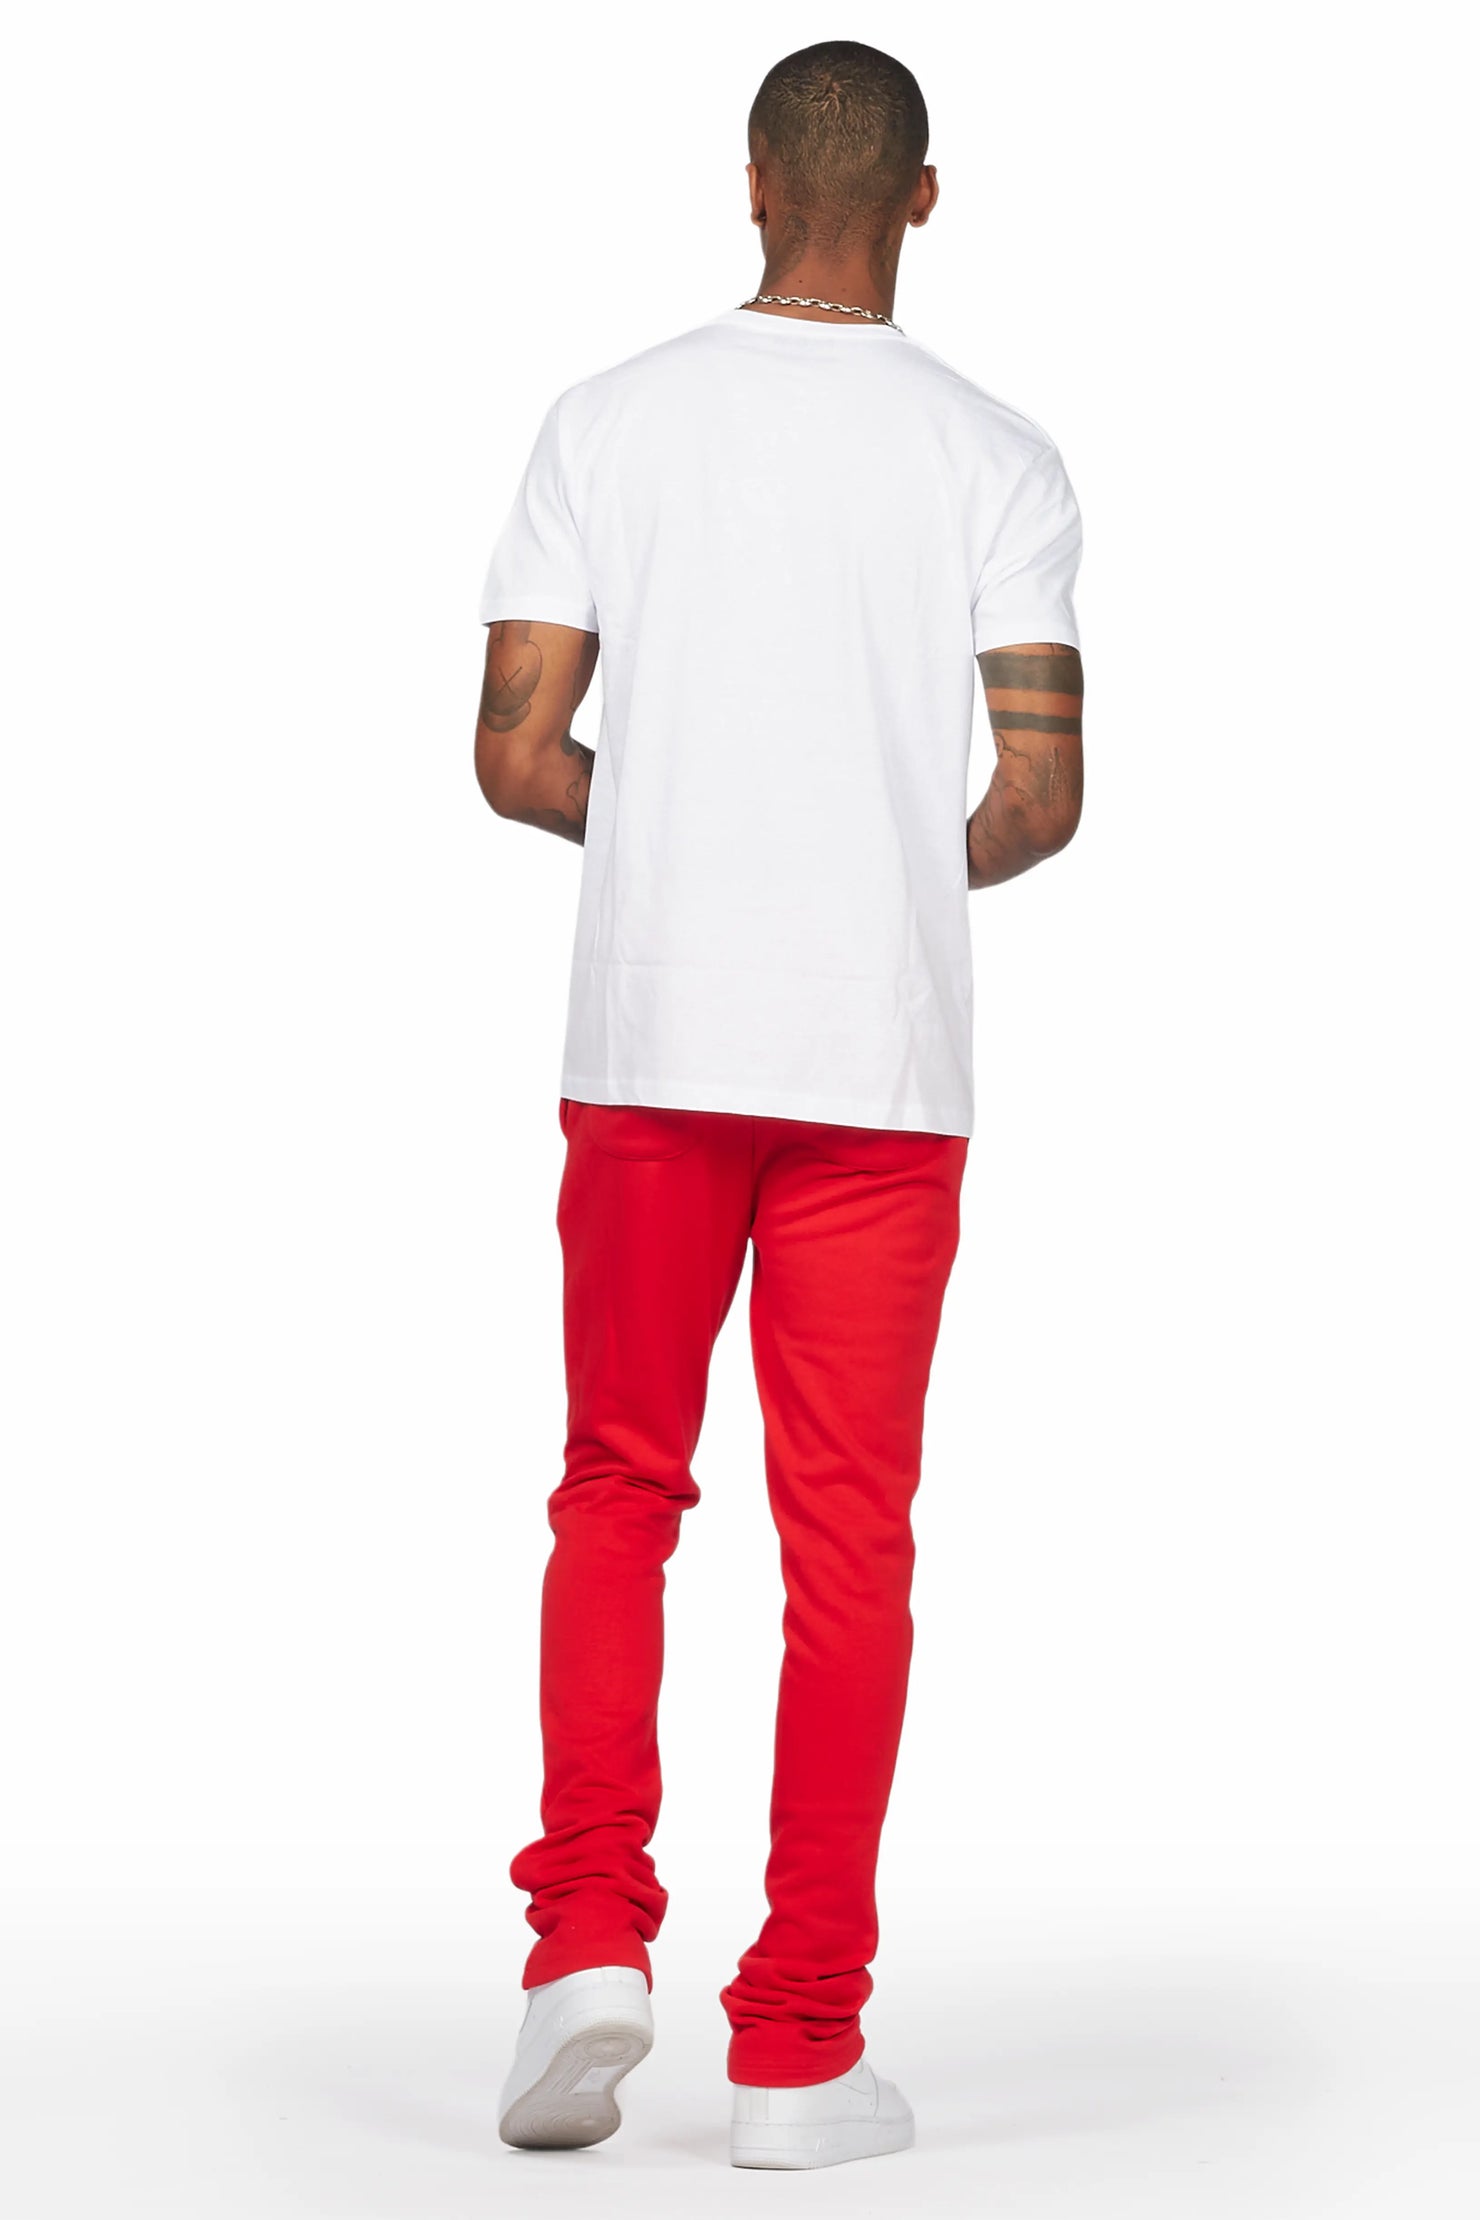 Warblen White/Red T-Shirt/Stacked Flare Pant Set